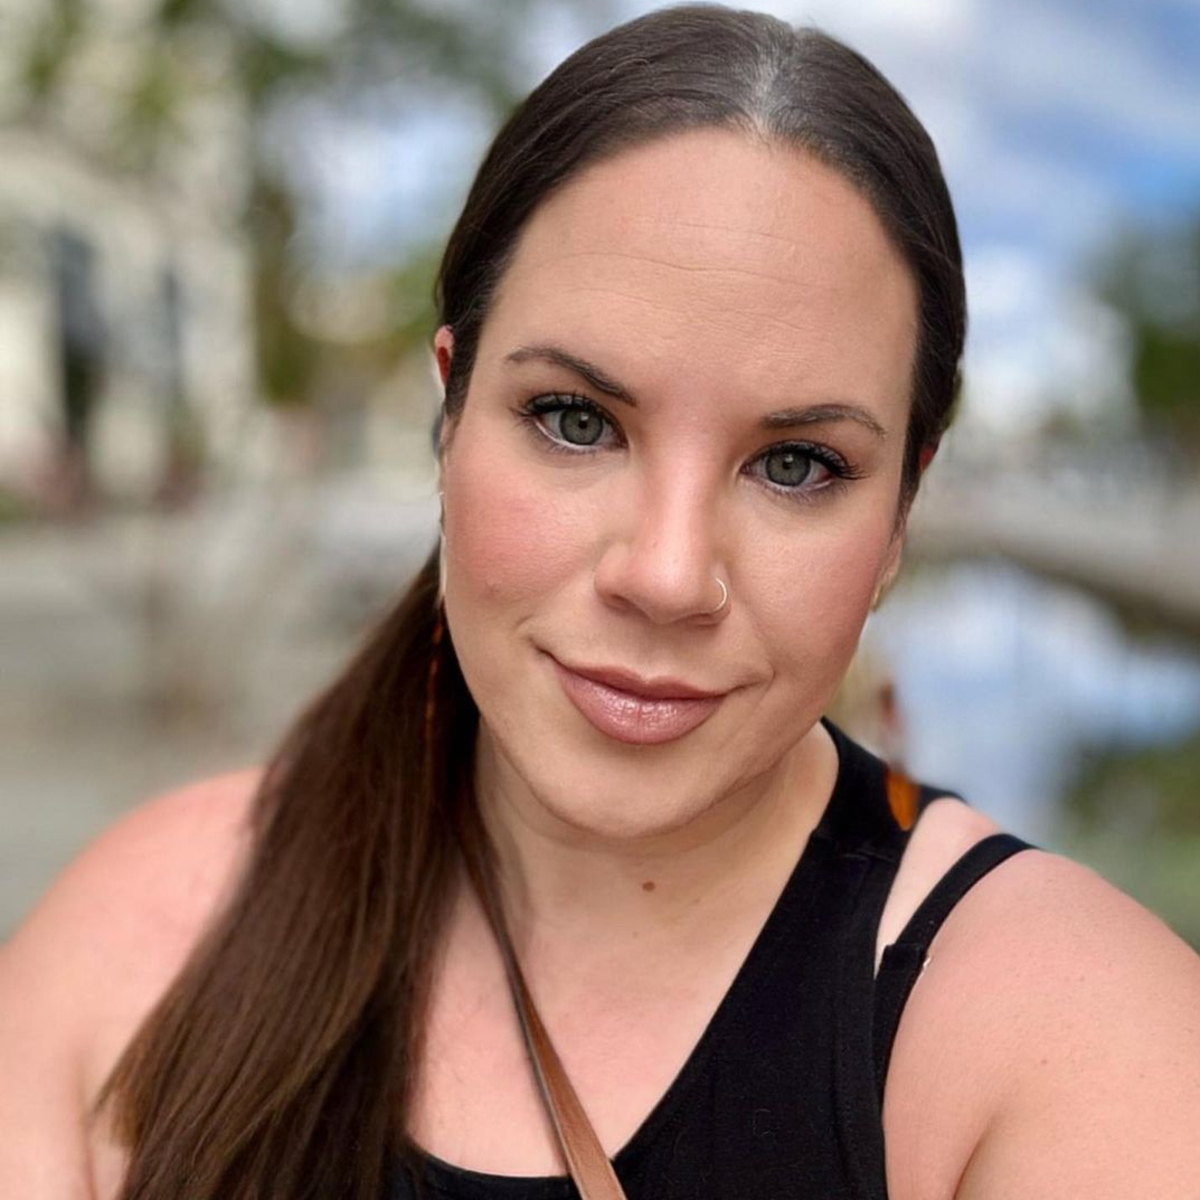 Whitney Way Thore Reveals the Cruel Insults That Led to Panic Attacks